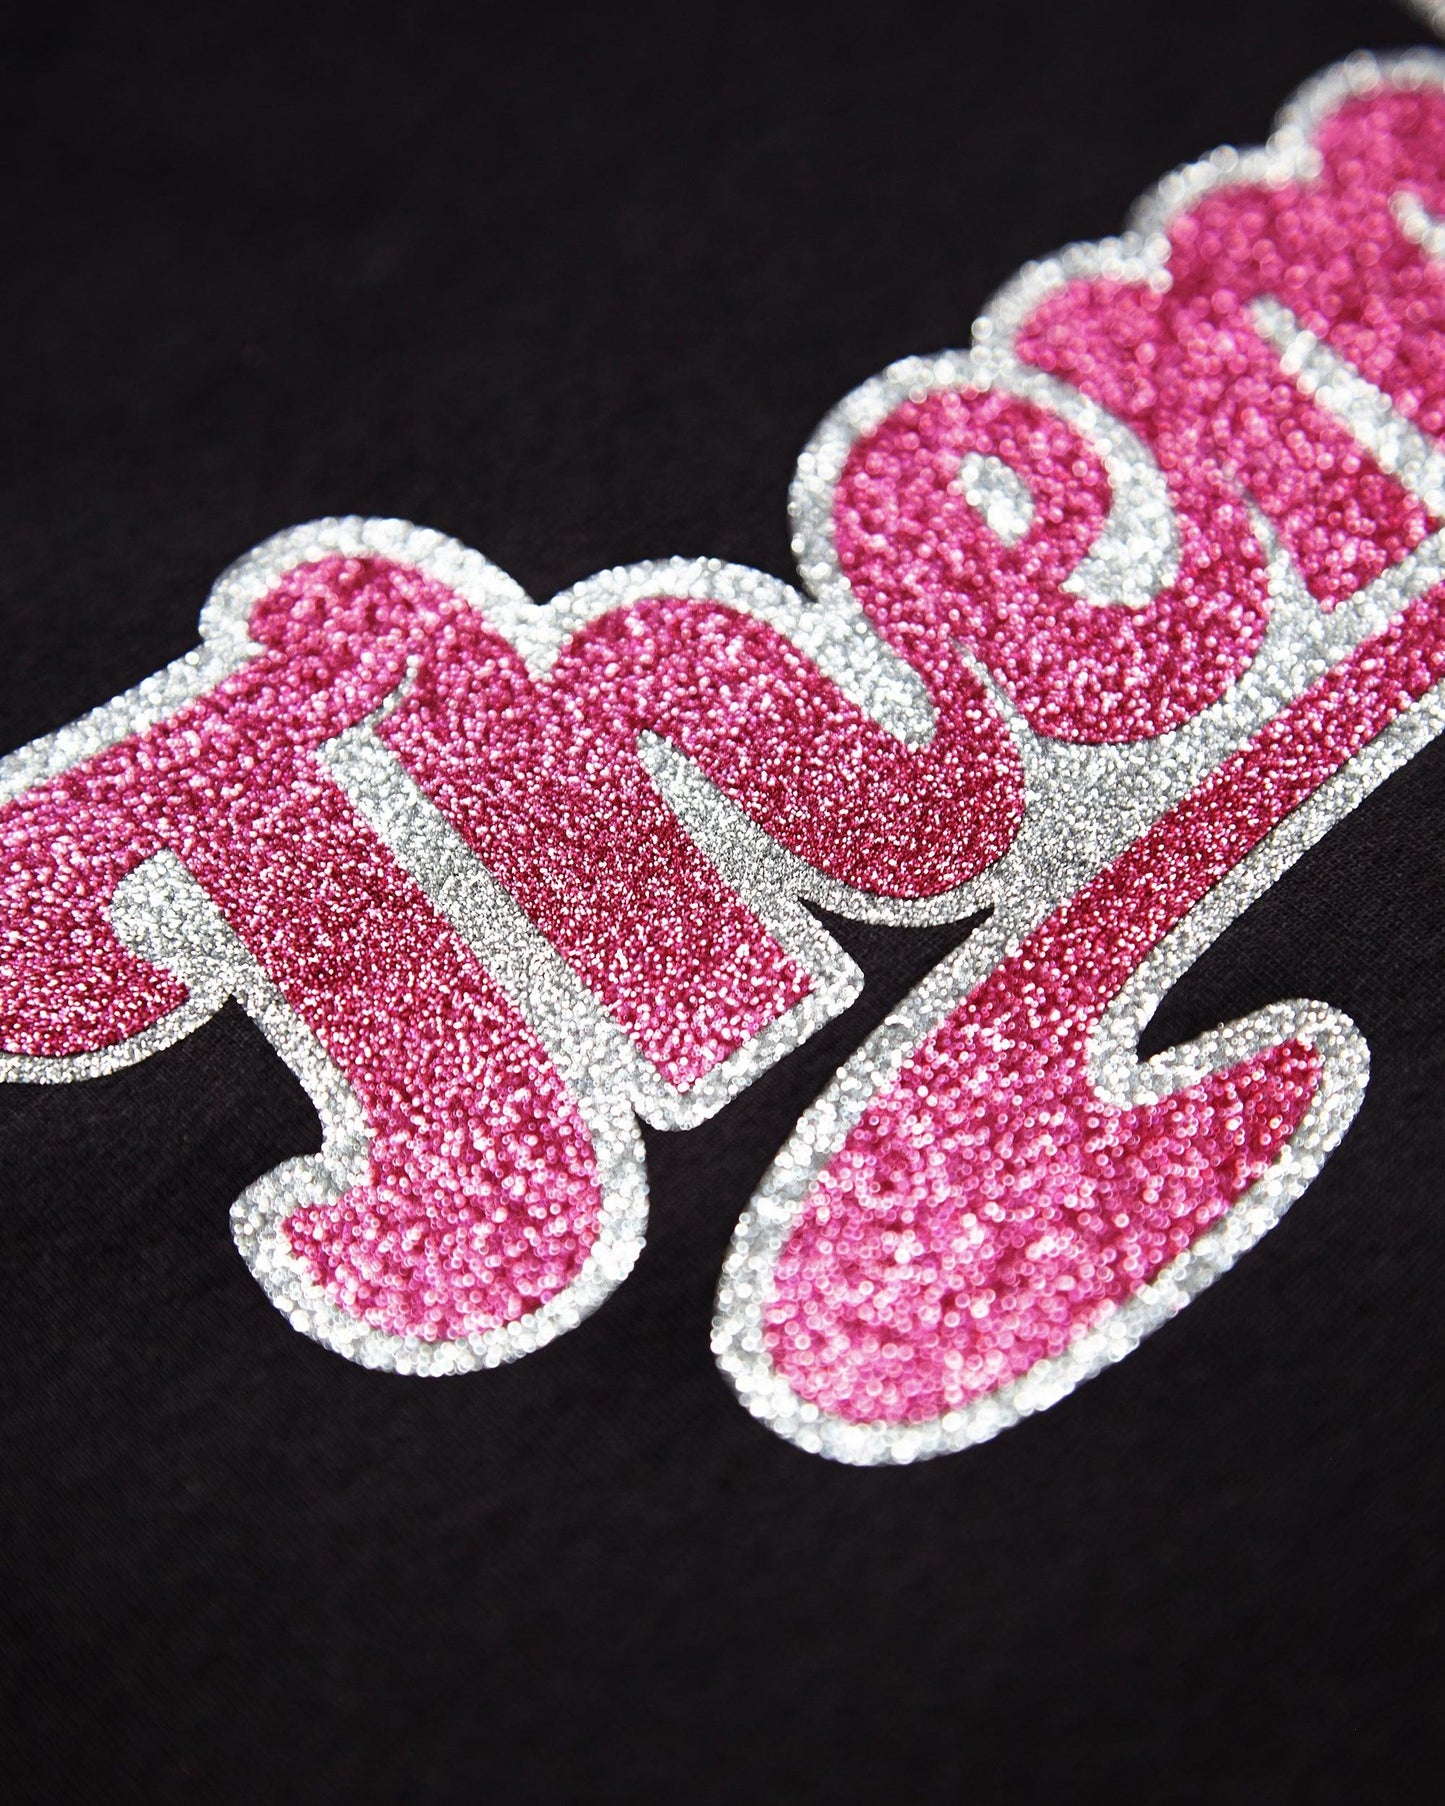 Thembo, pink/silver glitter on black - tee